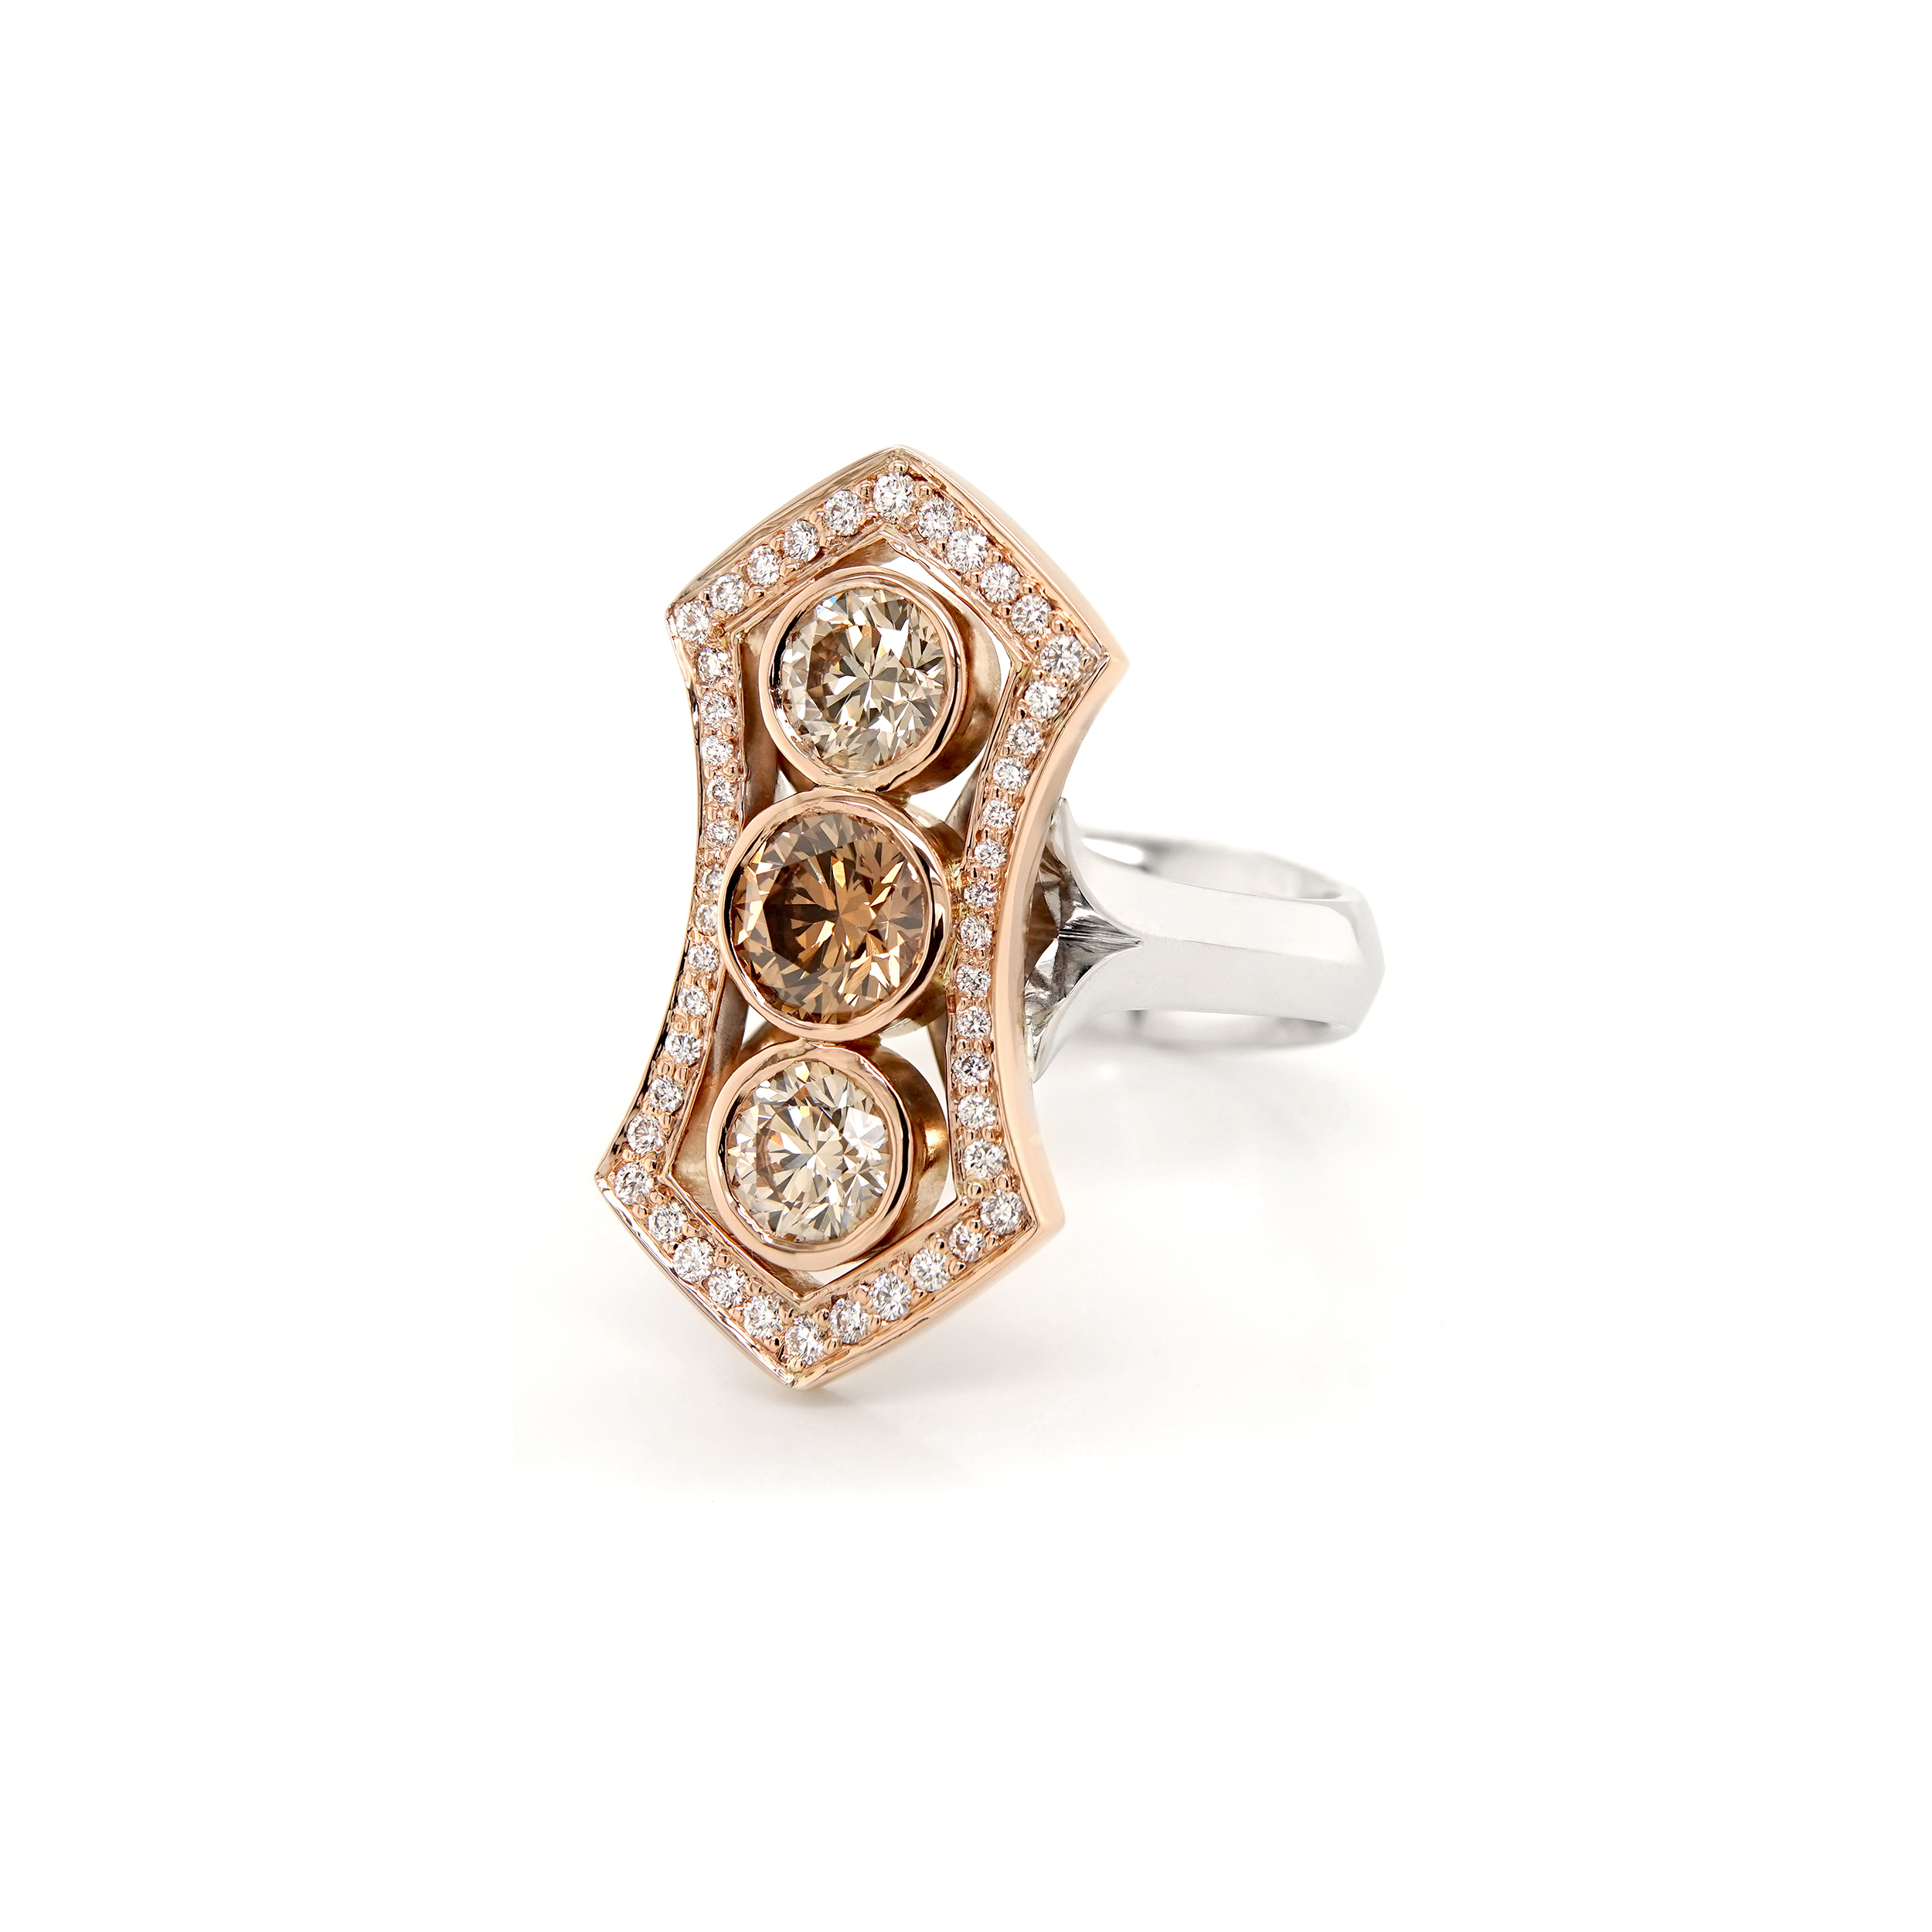 A dress ring. Three round brilliant cut Argyle champagne diamonds are bezel set in rose gold in a vertical formation, the centre stone being a darker colour than the outer two. The central three stones are surrounded by a decorative, shield like shaped halo of round brilliant cut diamonds grain set in rose gold. The white gold band features a knife edge, which splits and flares to meet the top of the undersetting.